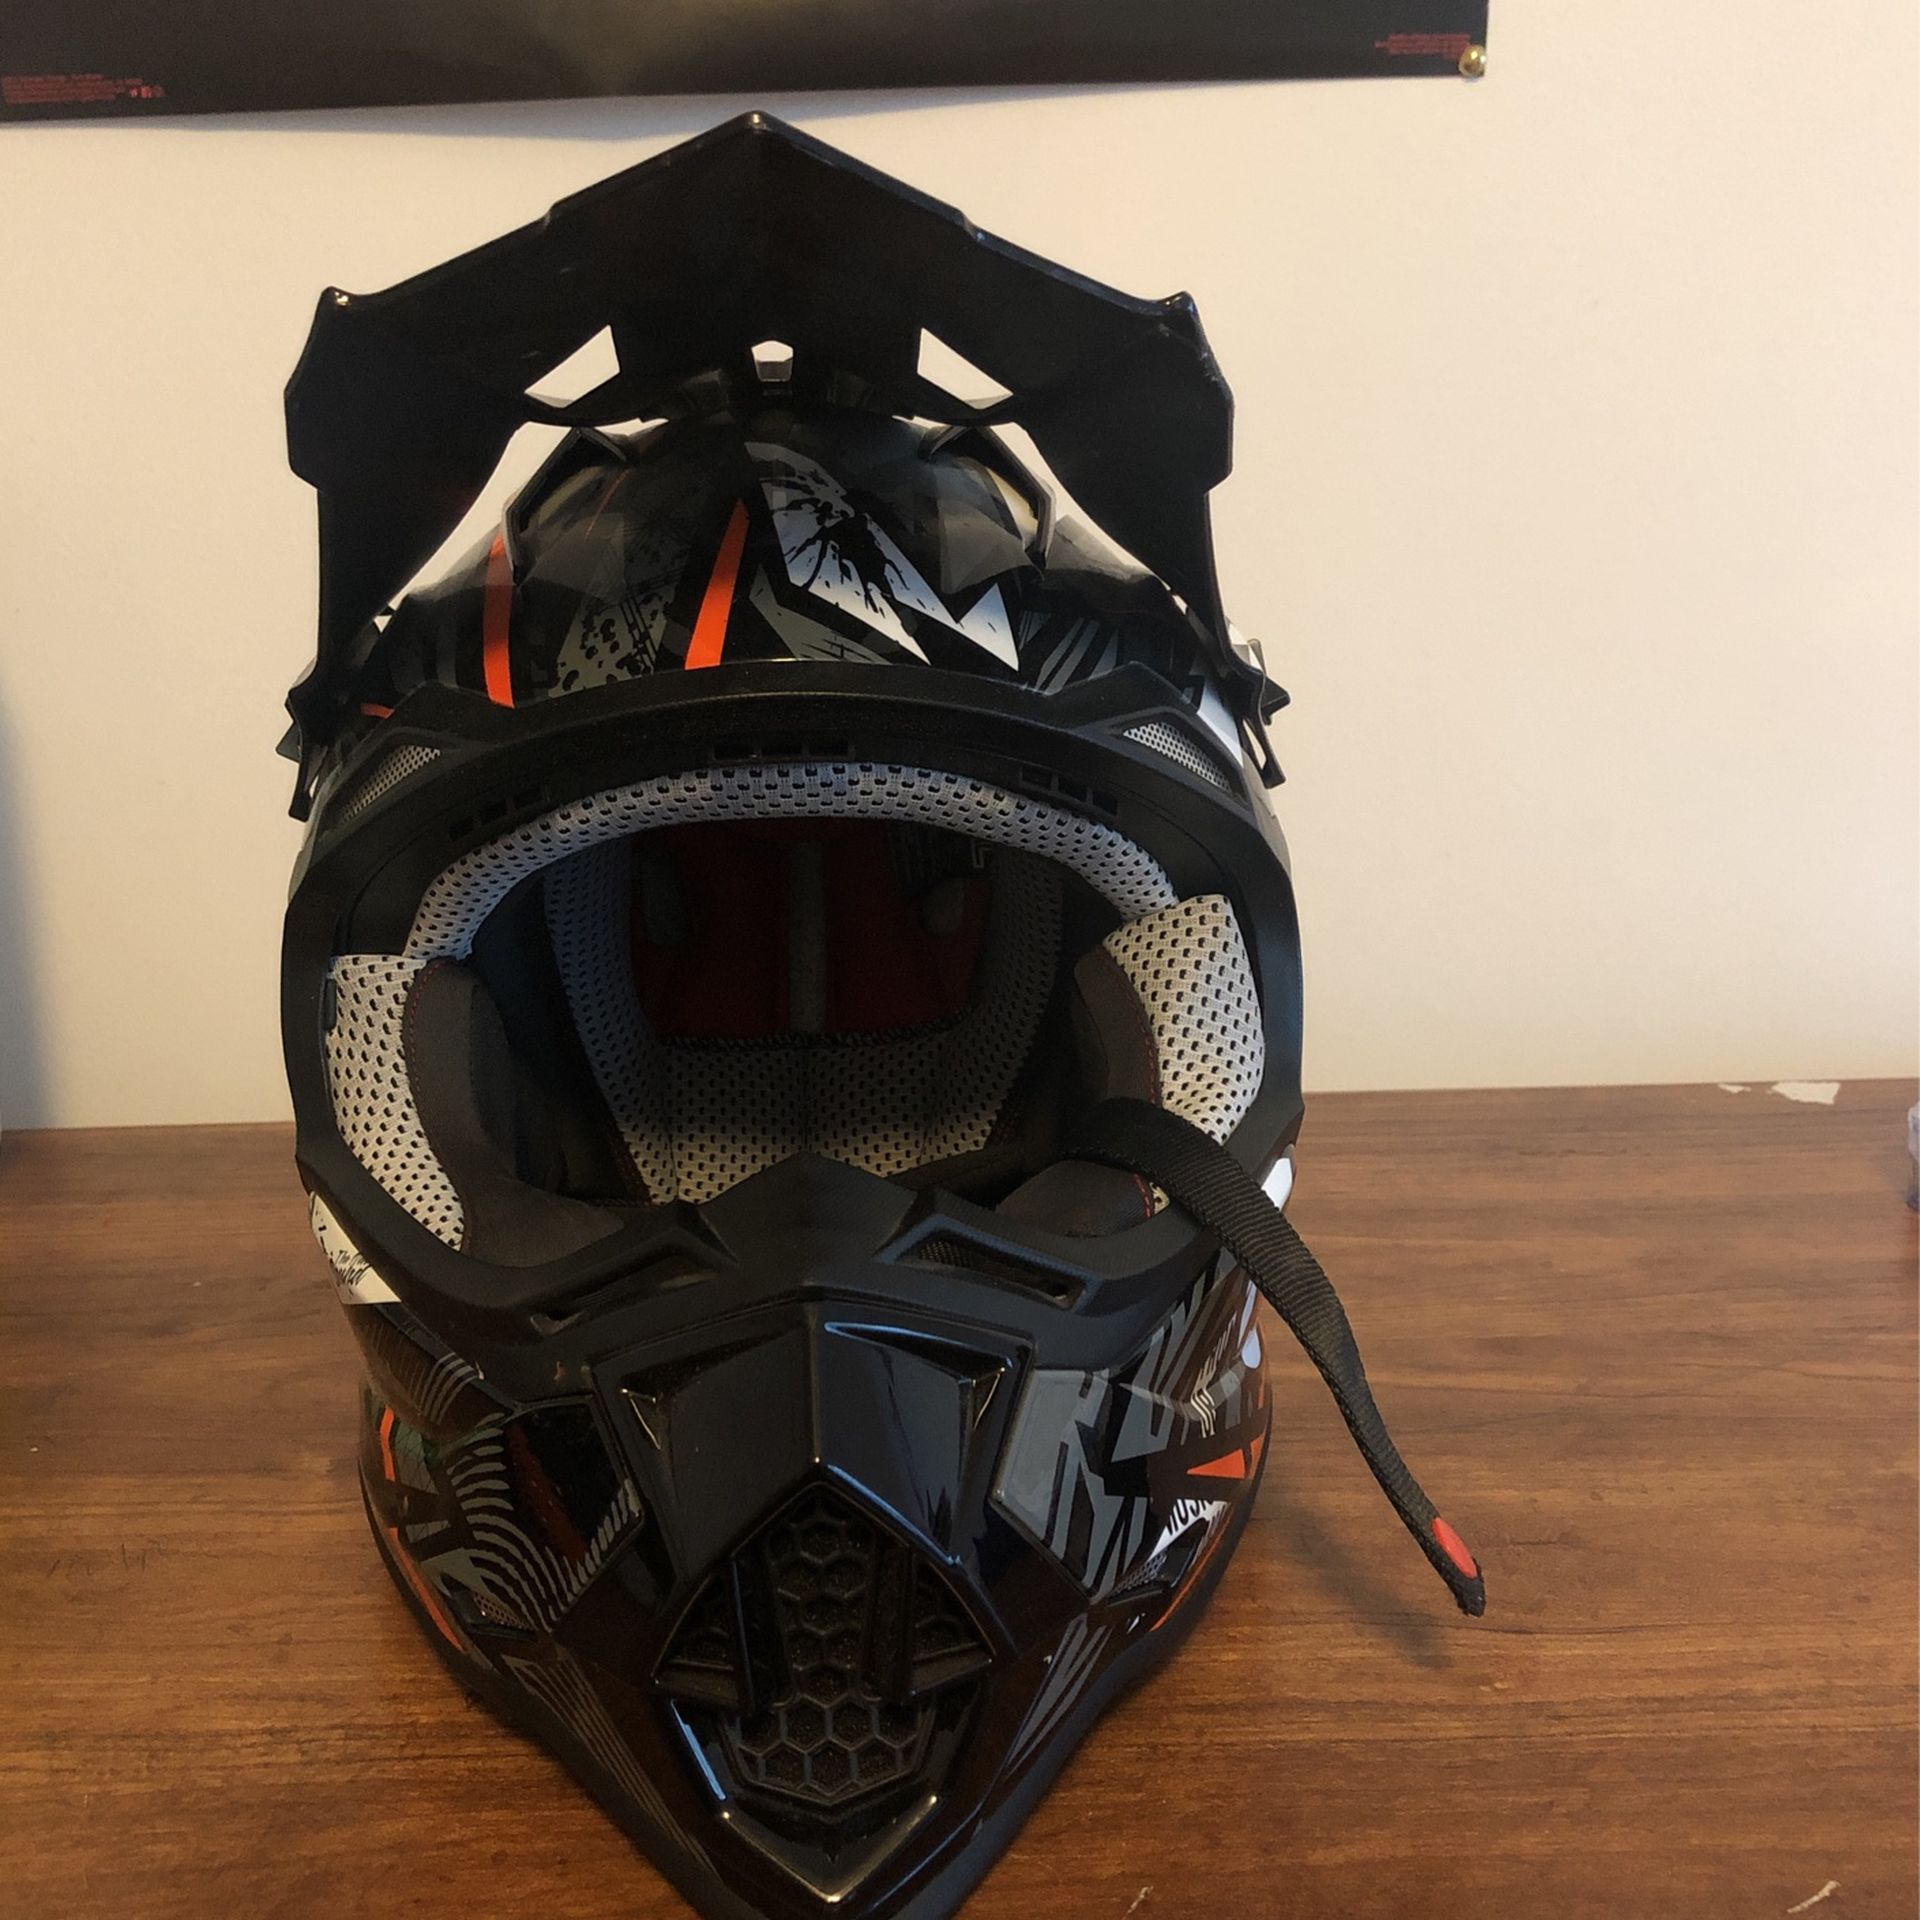 Selling My Full face Helmet. Made For Biking, Downhill, Motorcycling And Moto-Cross 